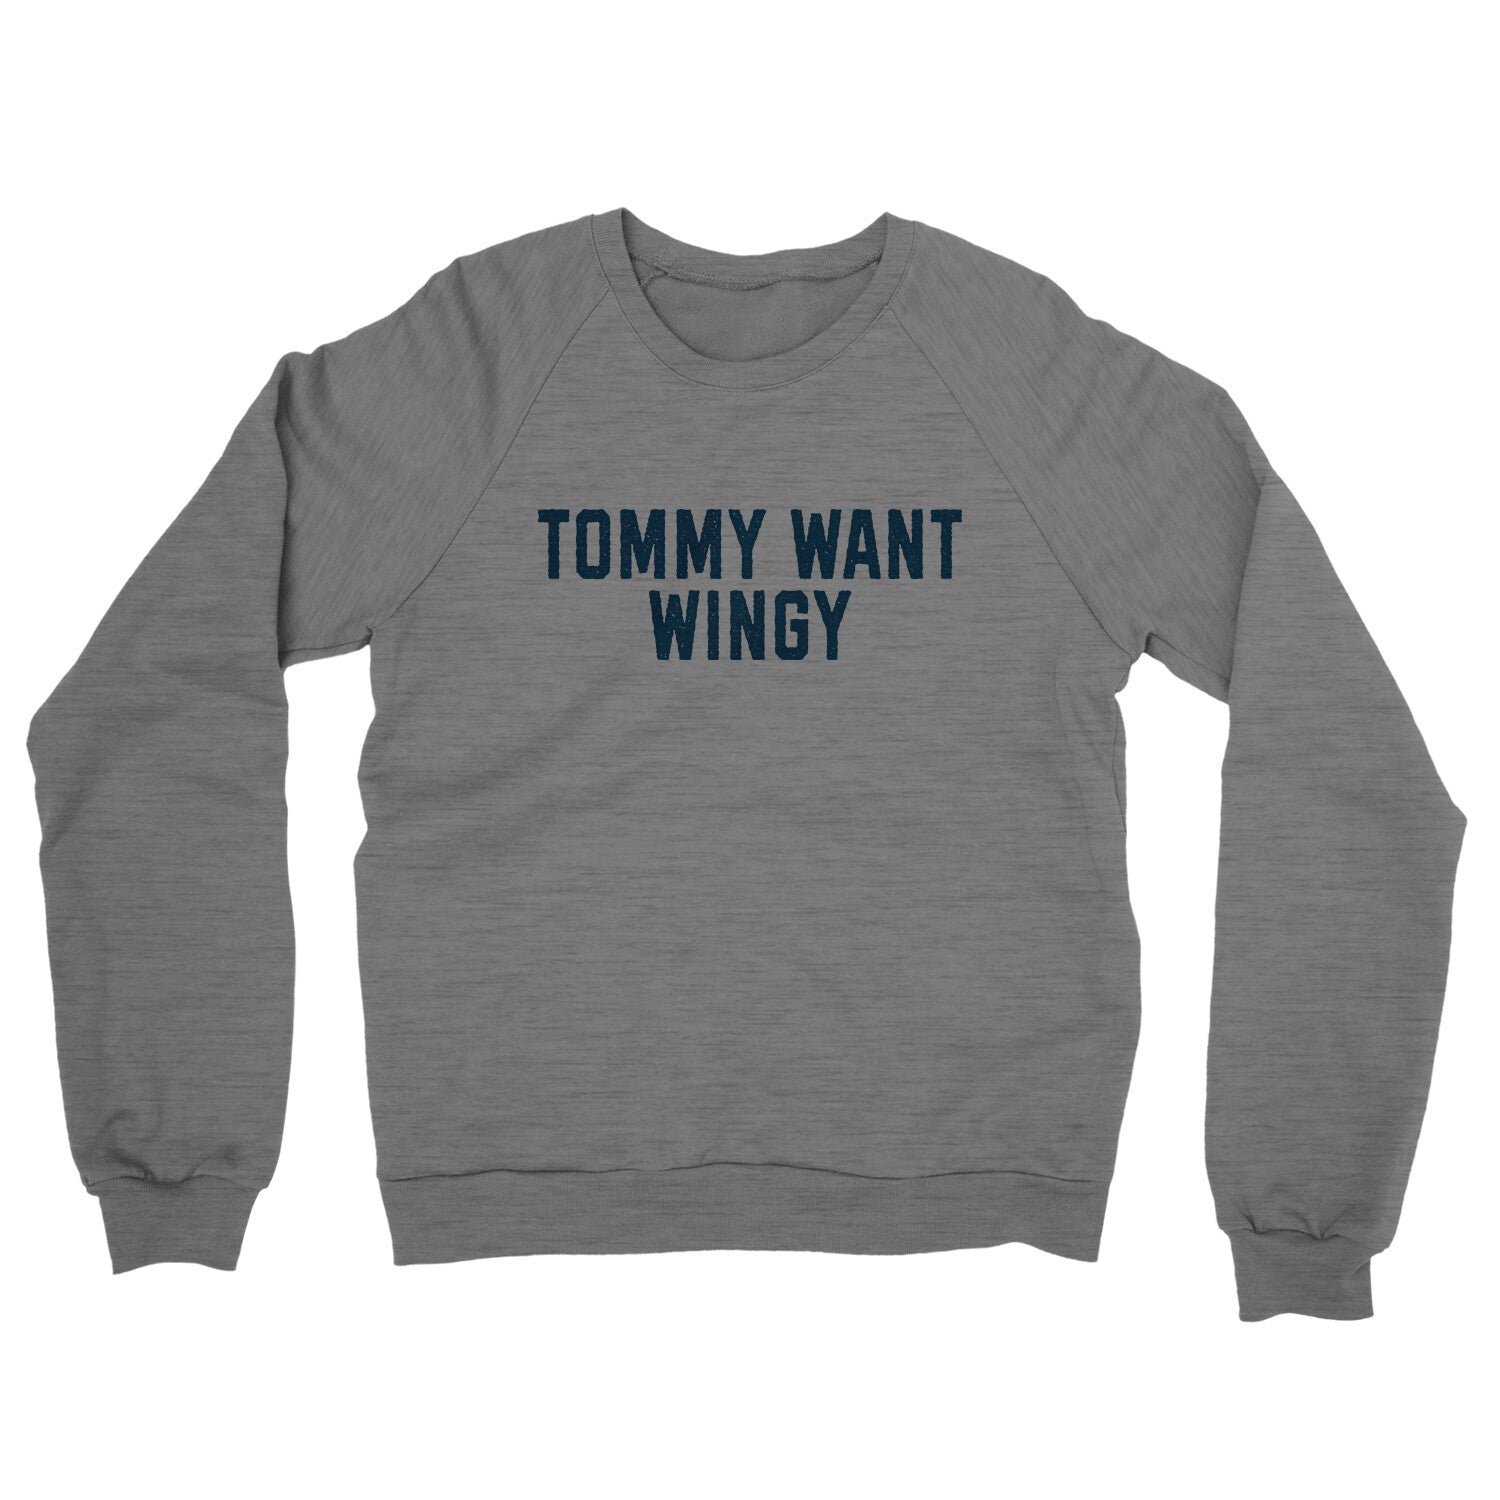 Tommy Want Wingy in Graphite Heather Color